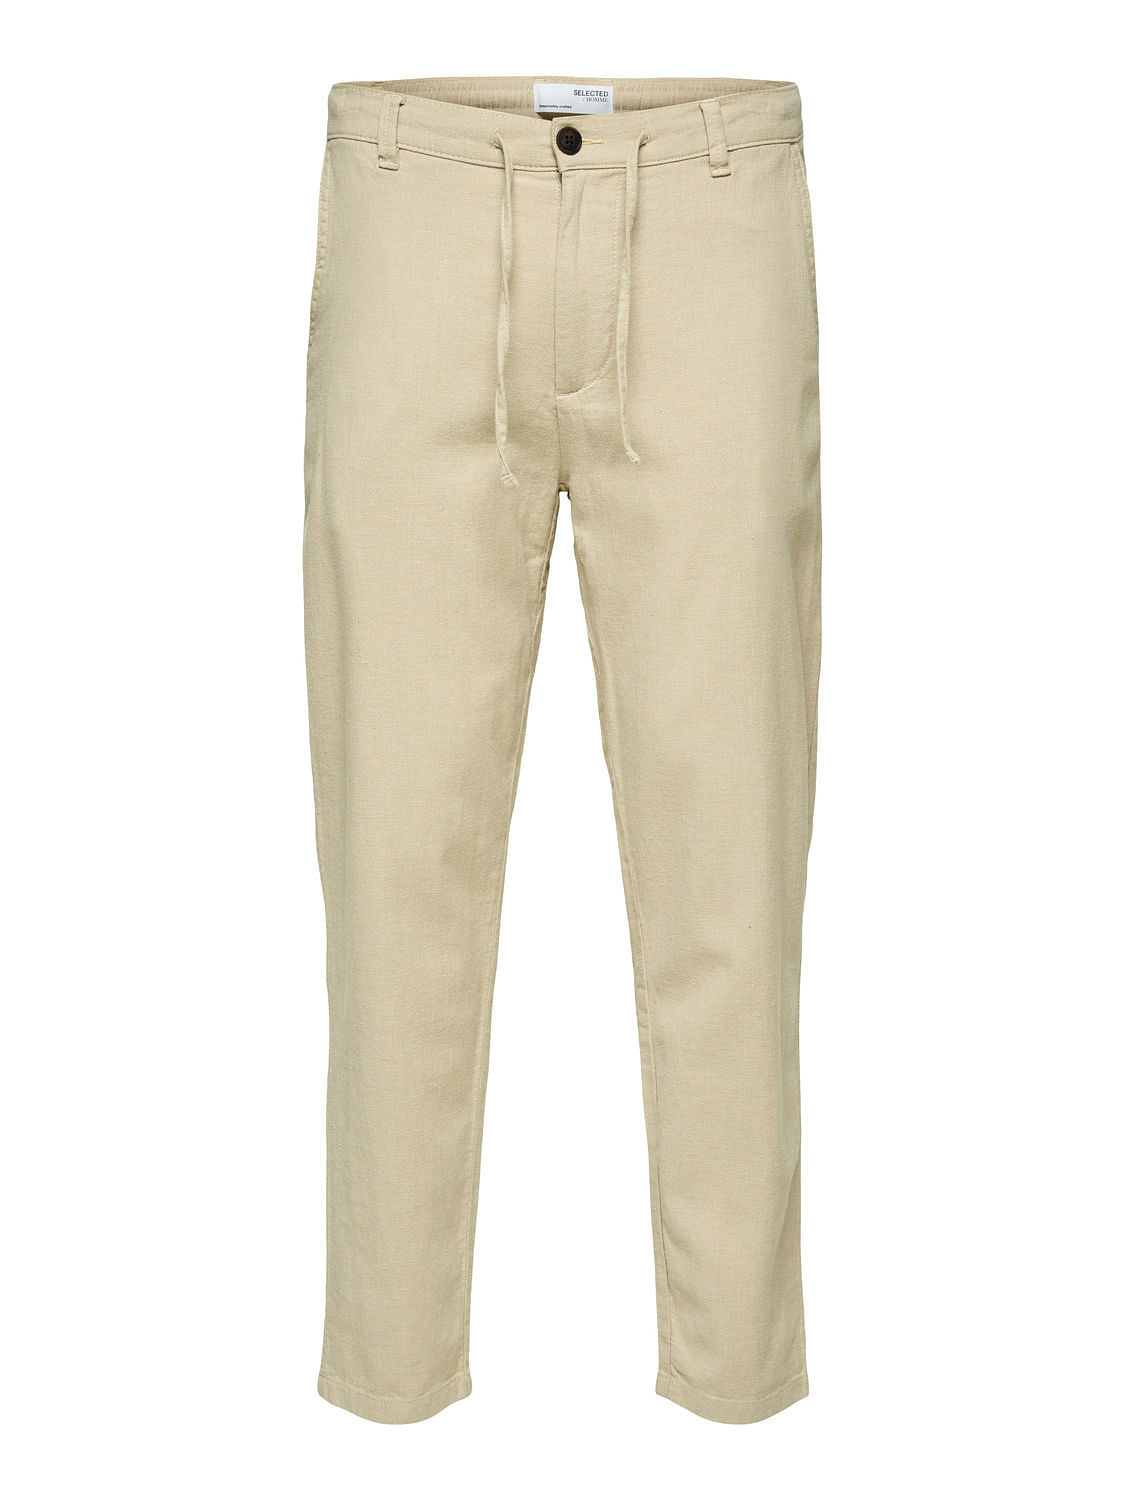 Buy Mustard Slim Fit Suit Trousers for Men Online at SELECTED HOMME   129584501